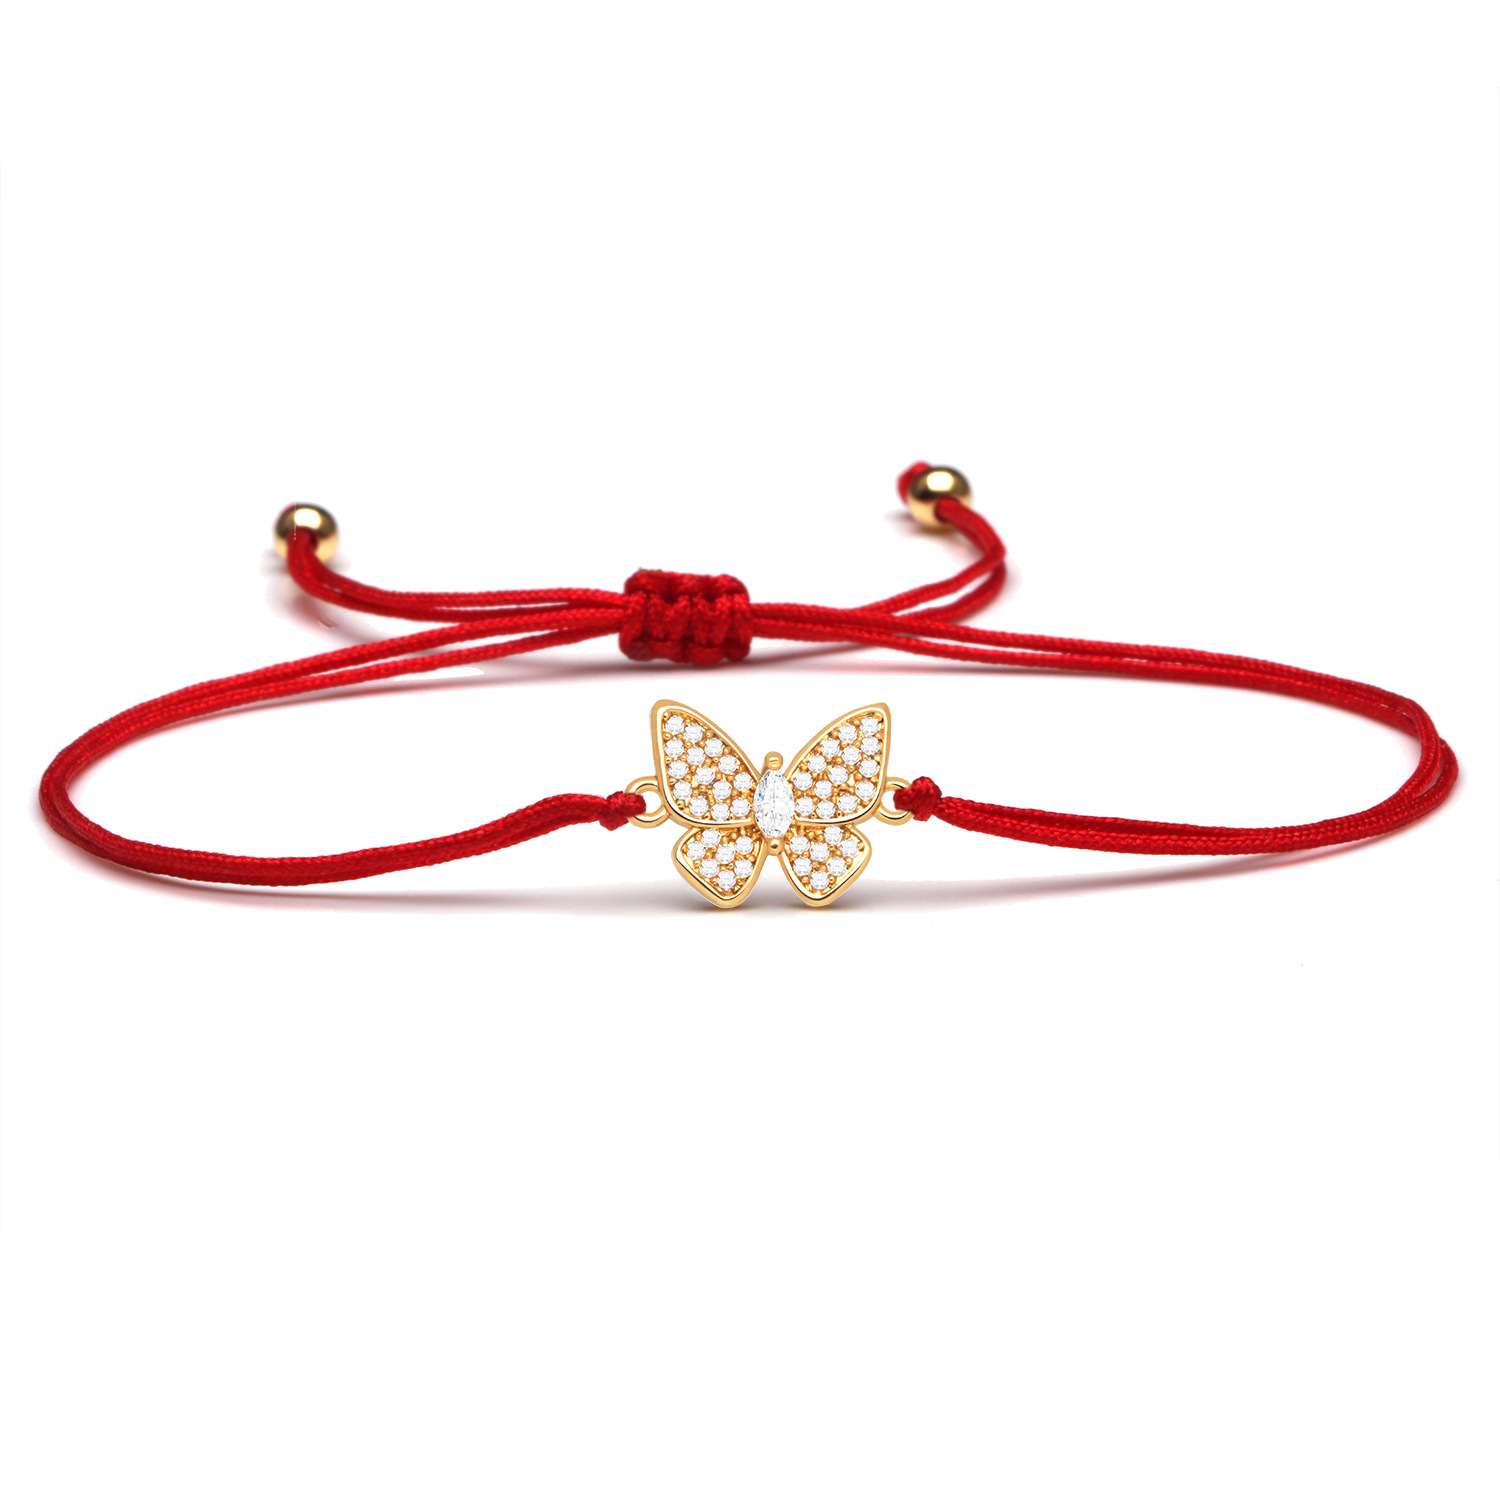 1:gold color plated with red